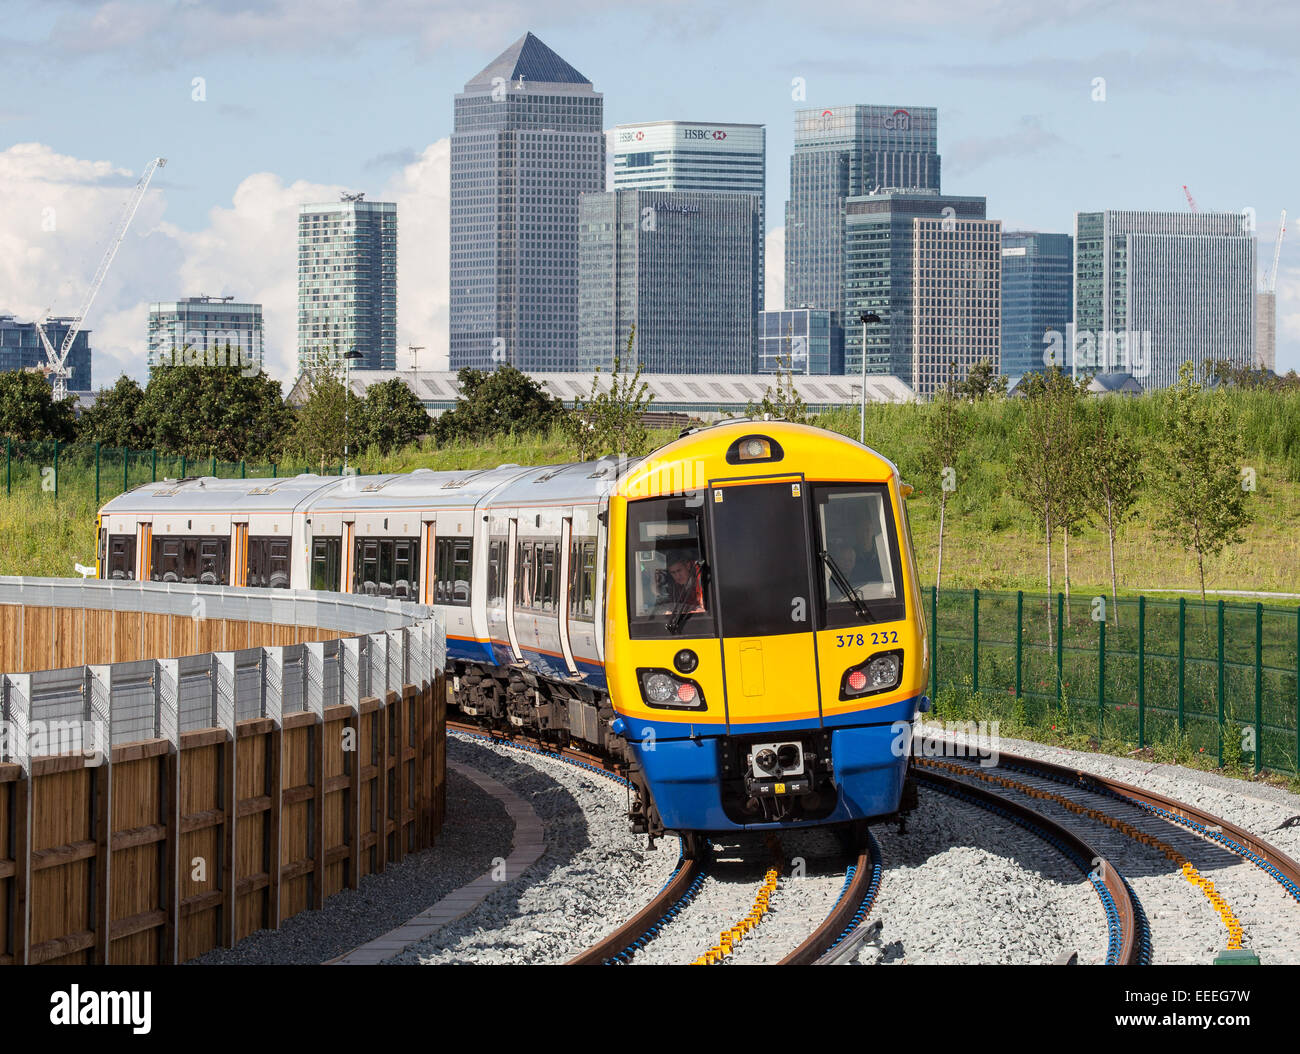 London Overground - ELLP phase 2: The first test train on the track Stock Photo